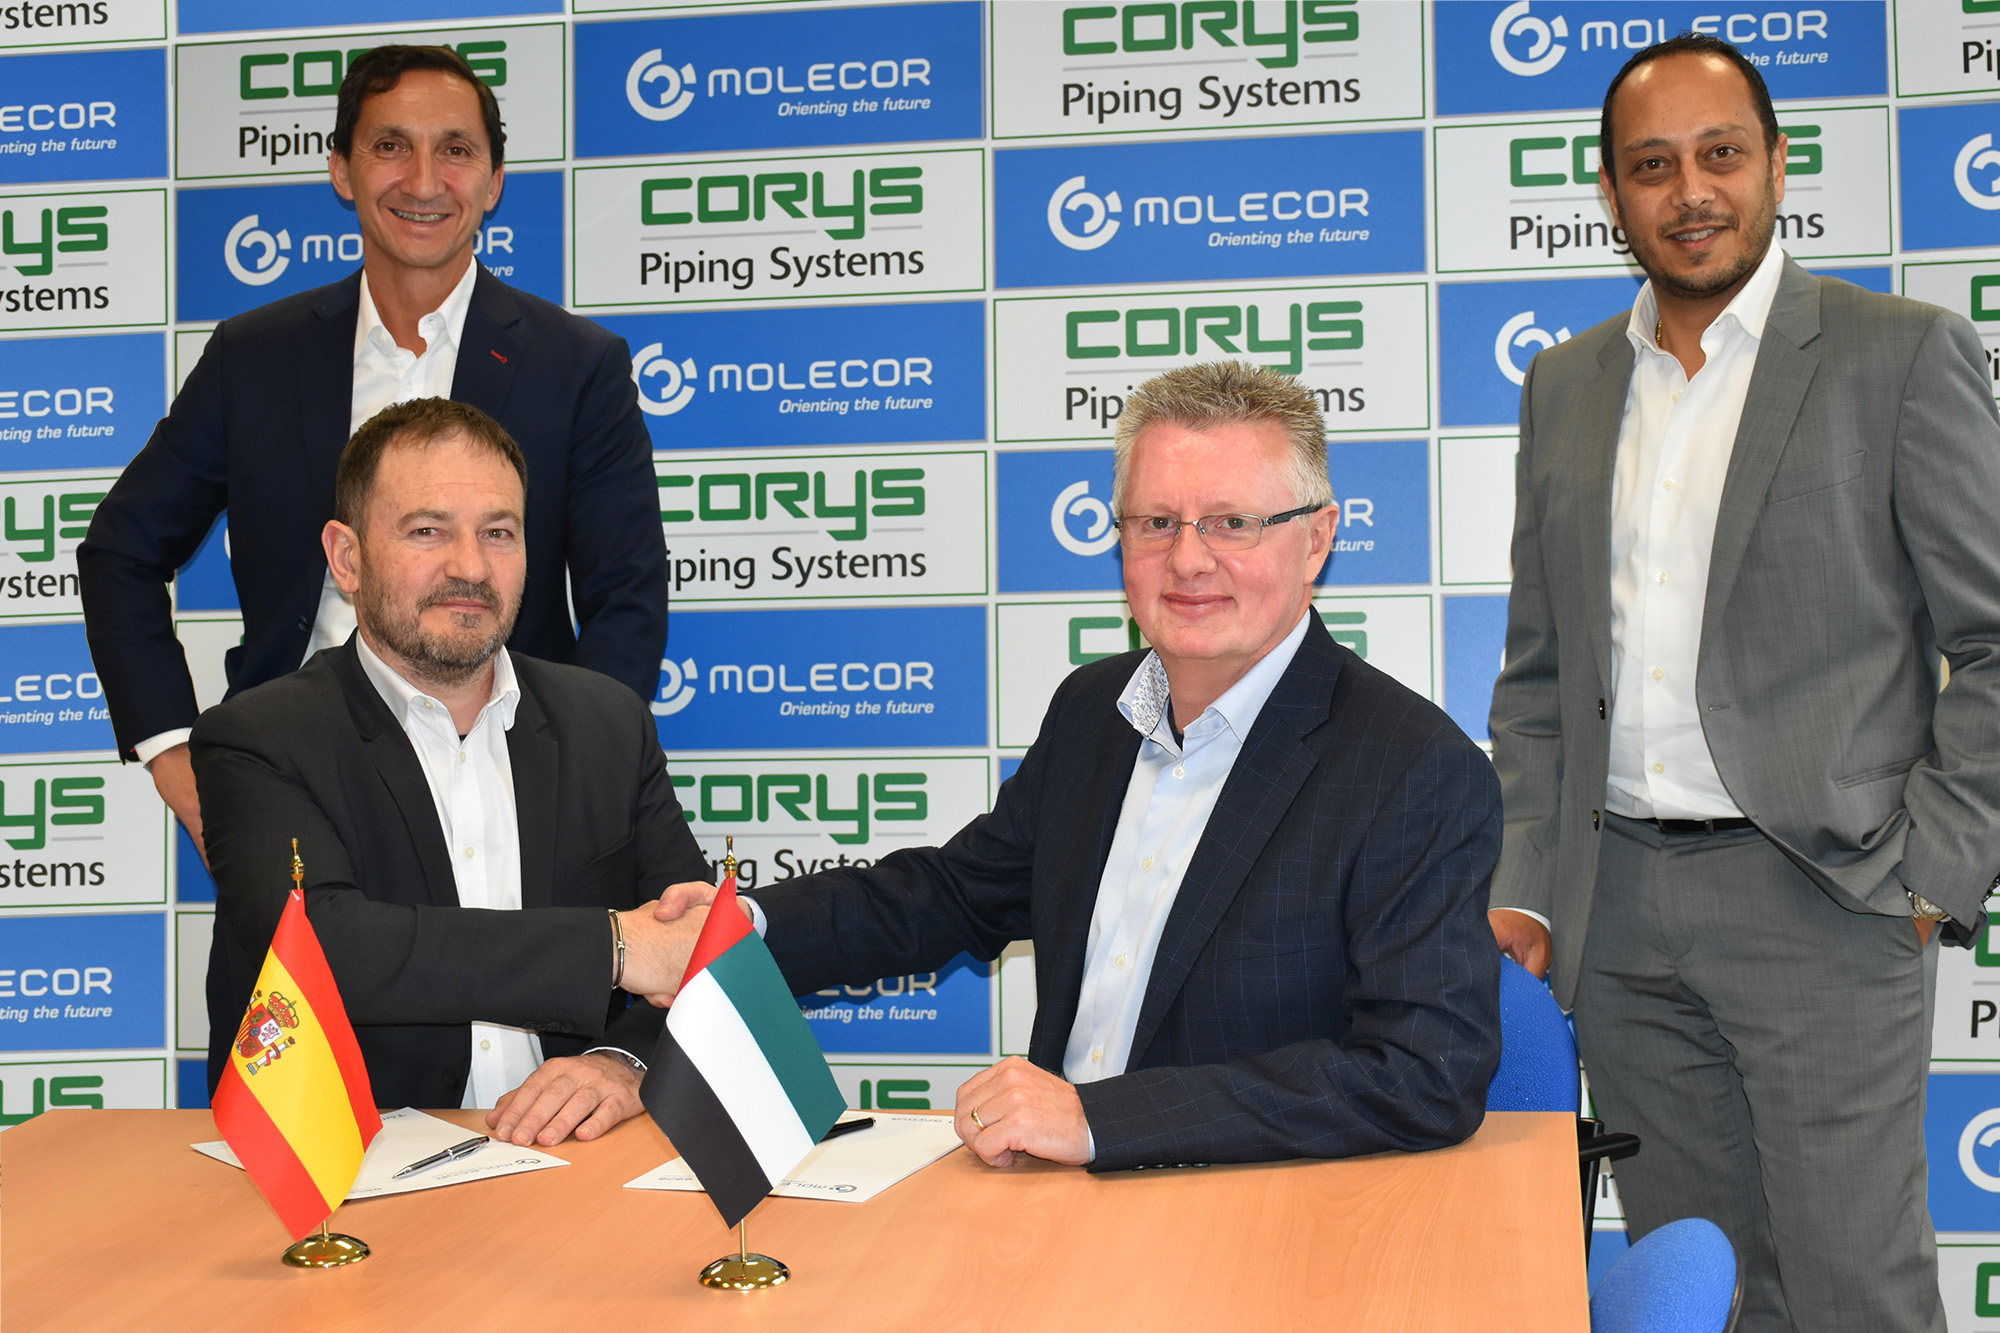 Molecor signs regional partnership agreement with Corys Piping Systems for PVC-O pipes, catering to increased customer demands for more sustainable, reliable, and cost-effective water supply piping systems.